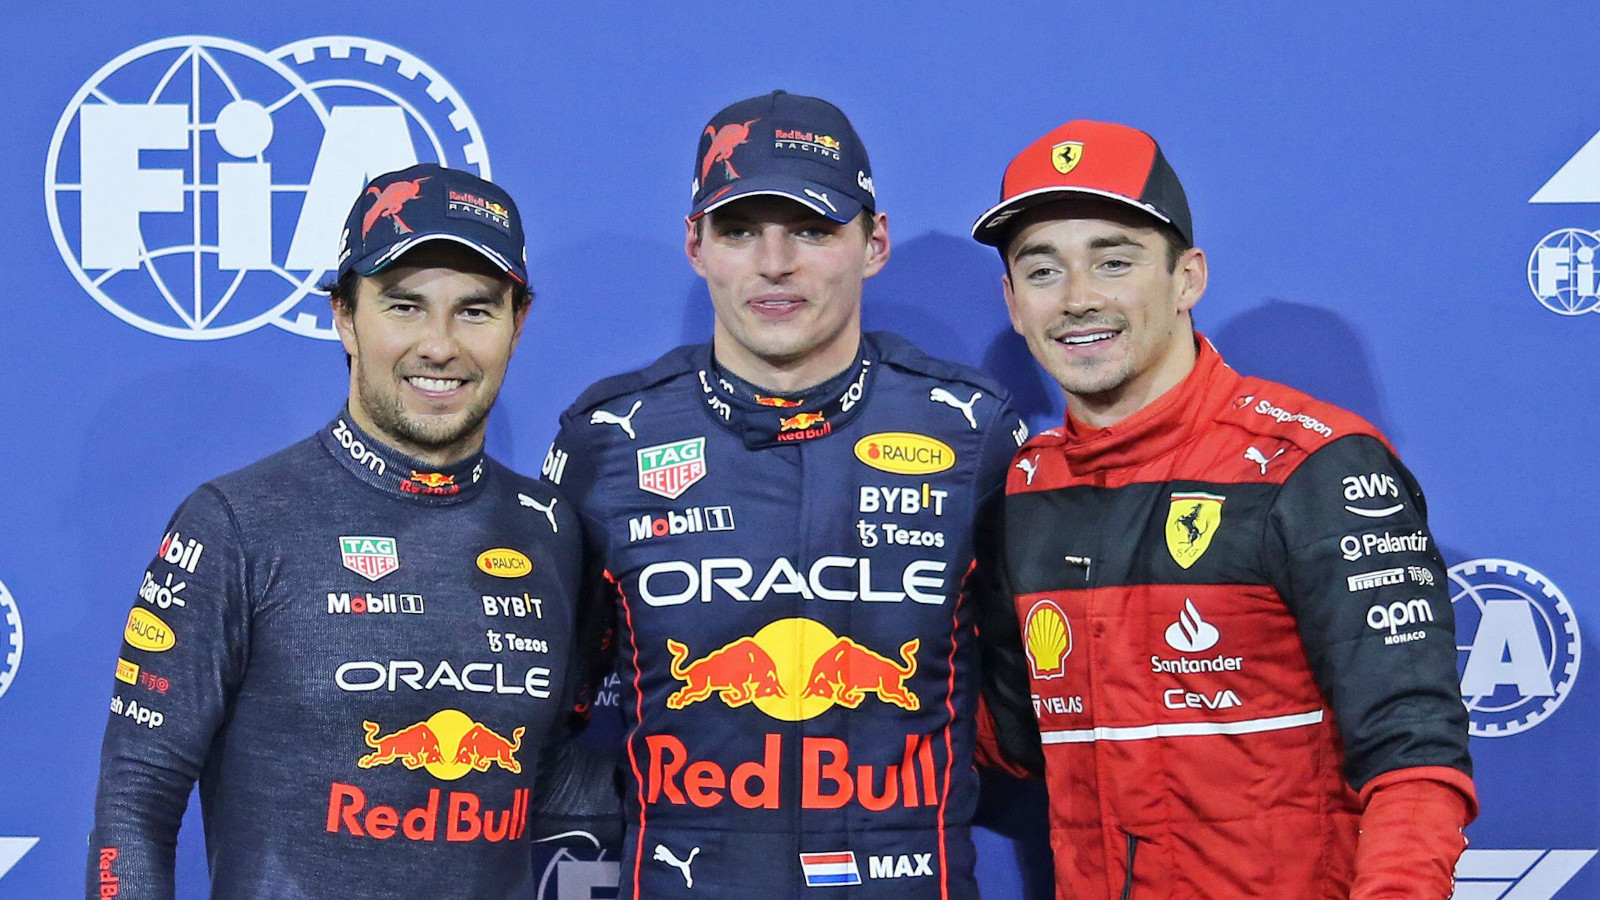 Max Verstappen on pole ahead of Sergio Perez and Charles Leclerc. Abu Dhabi November 2022